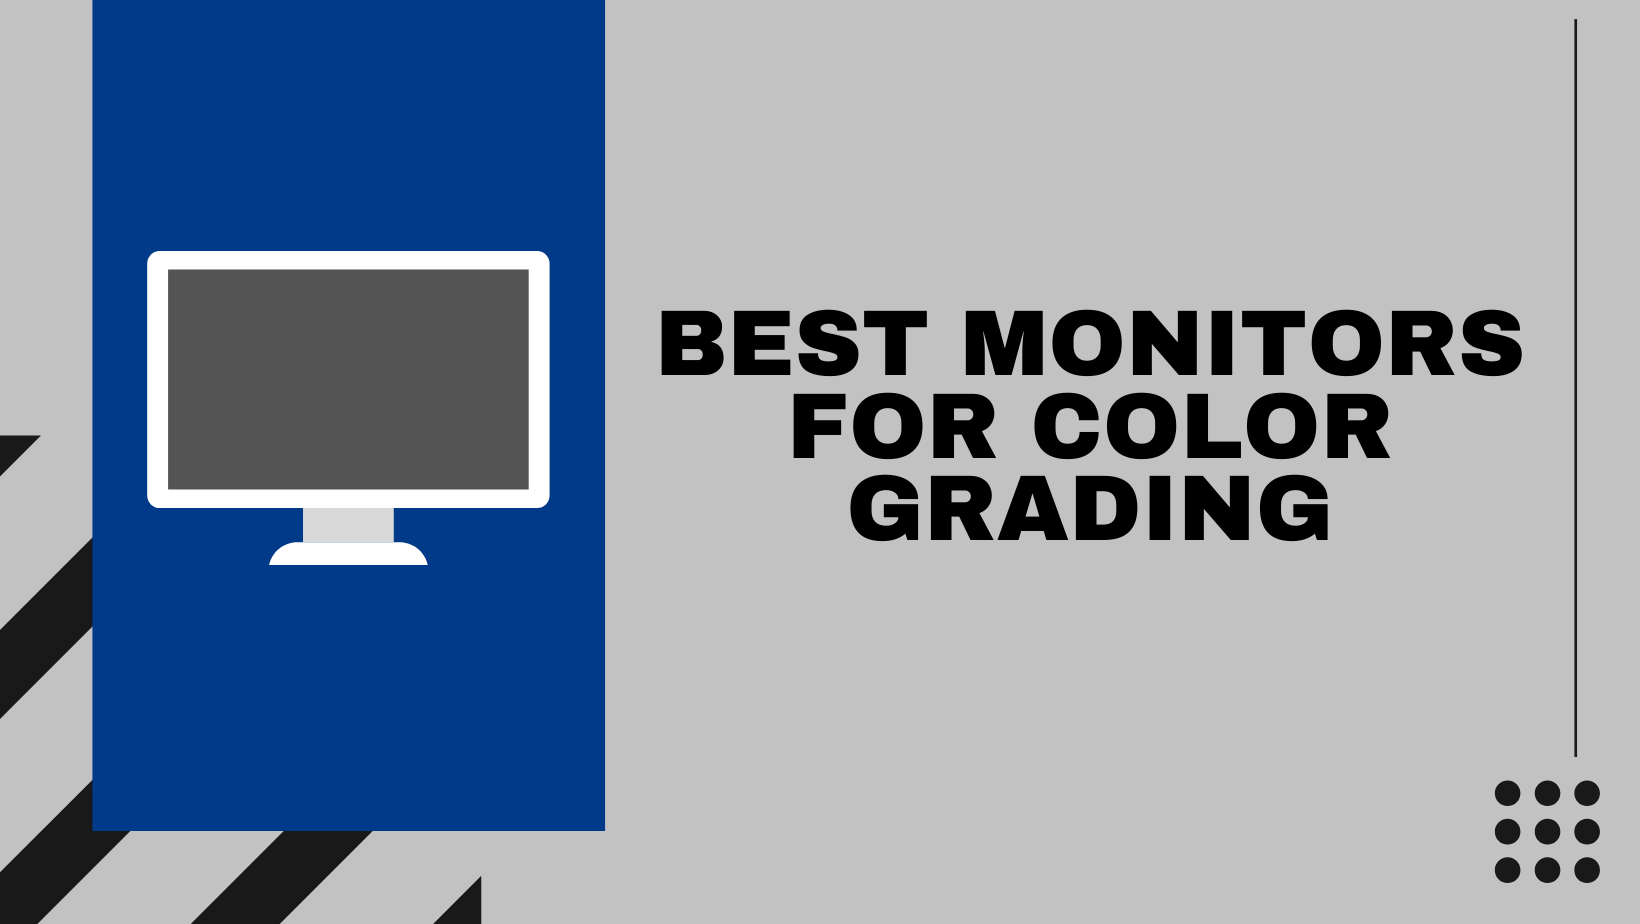 Best Monitors For Color Grading